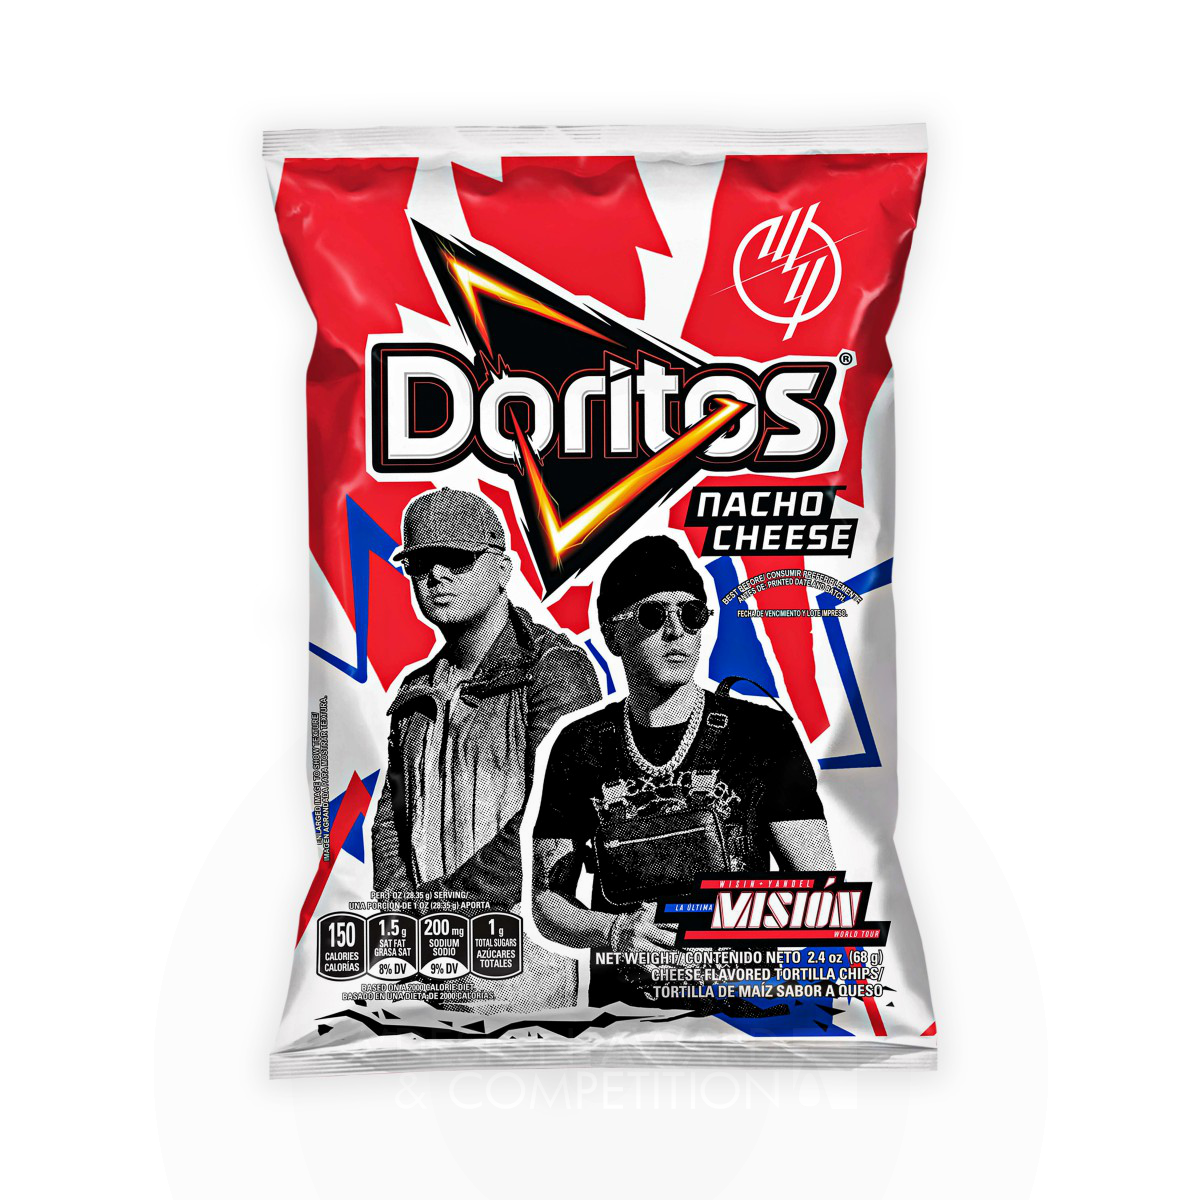 Doritos W and Y Food Packaging by PepsiCo Design & Innovation